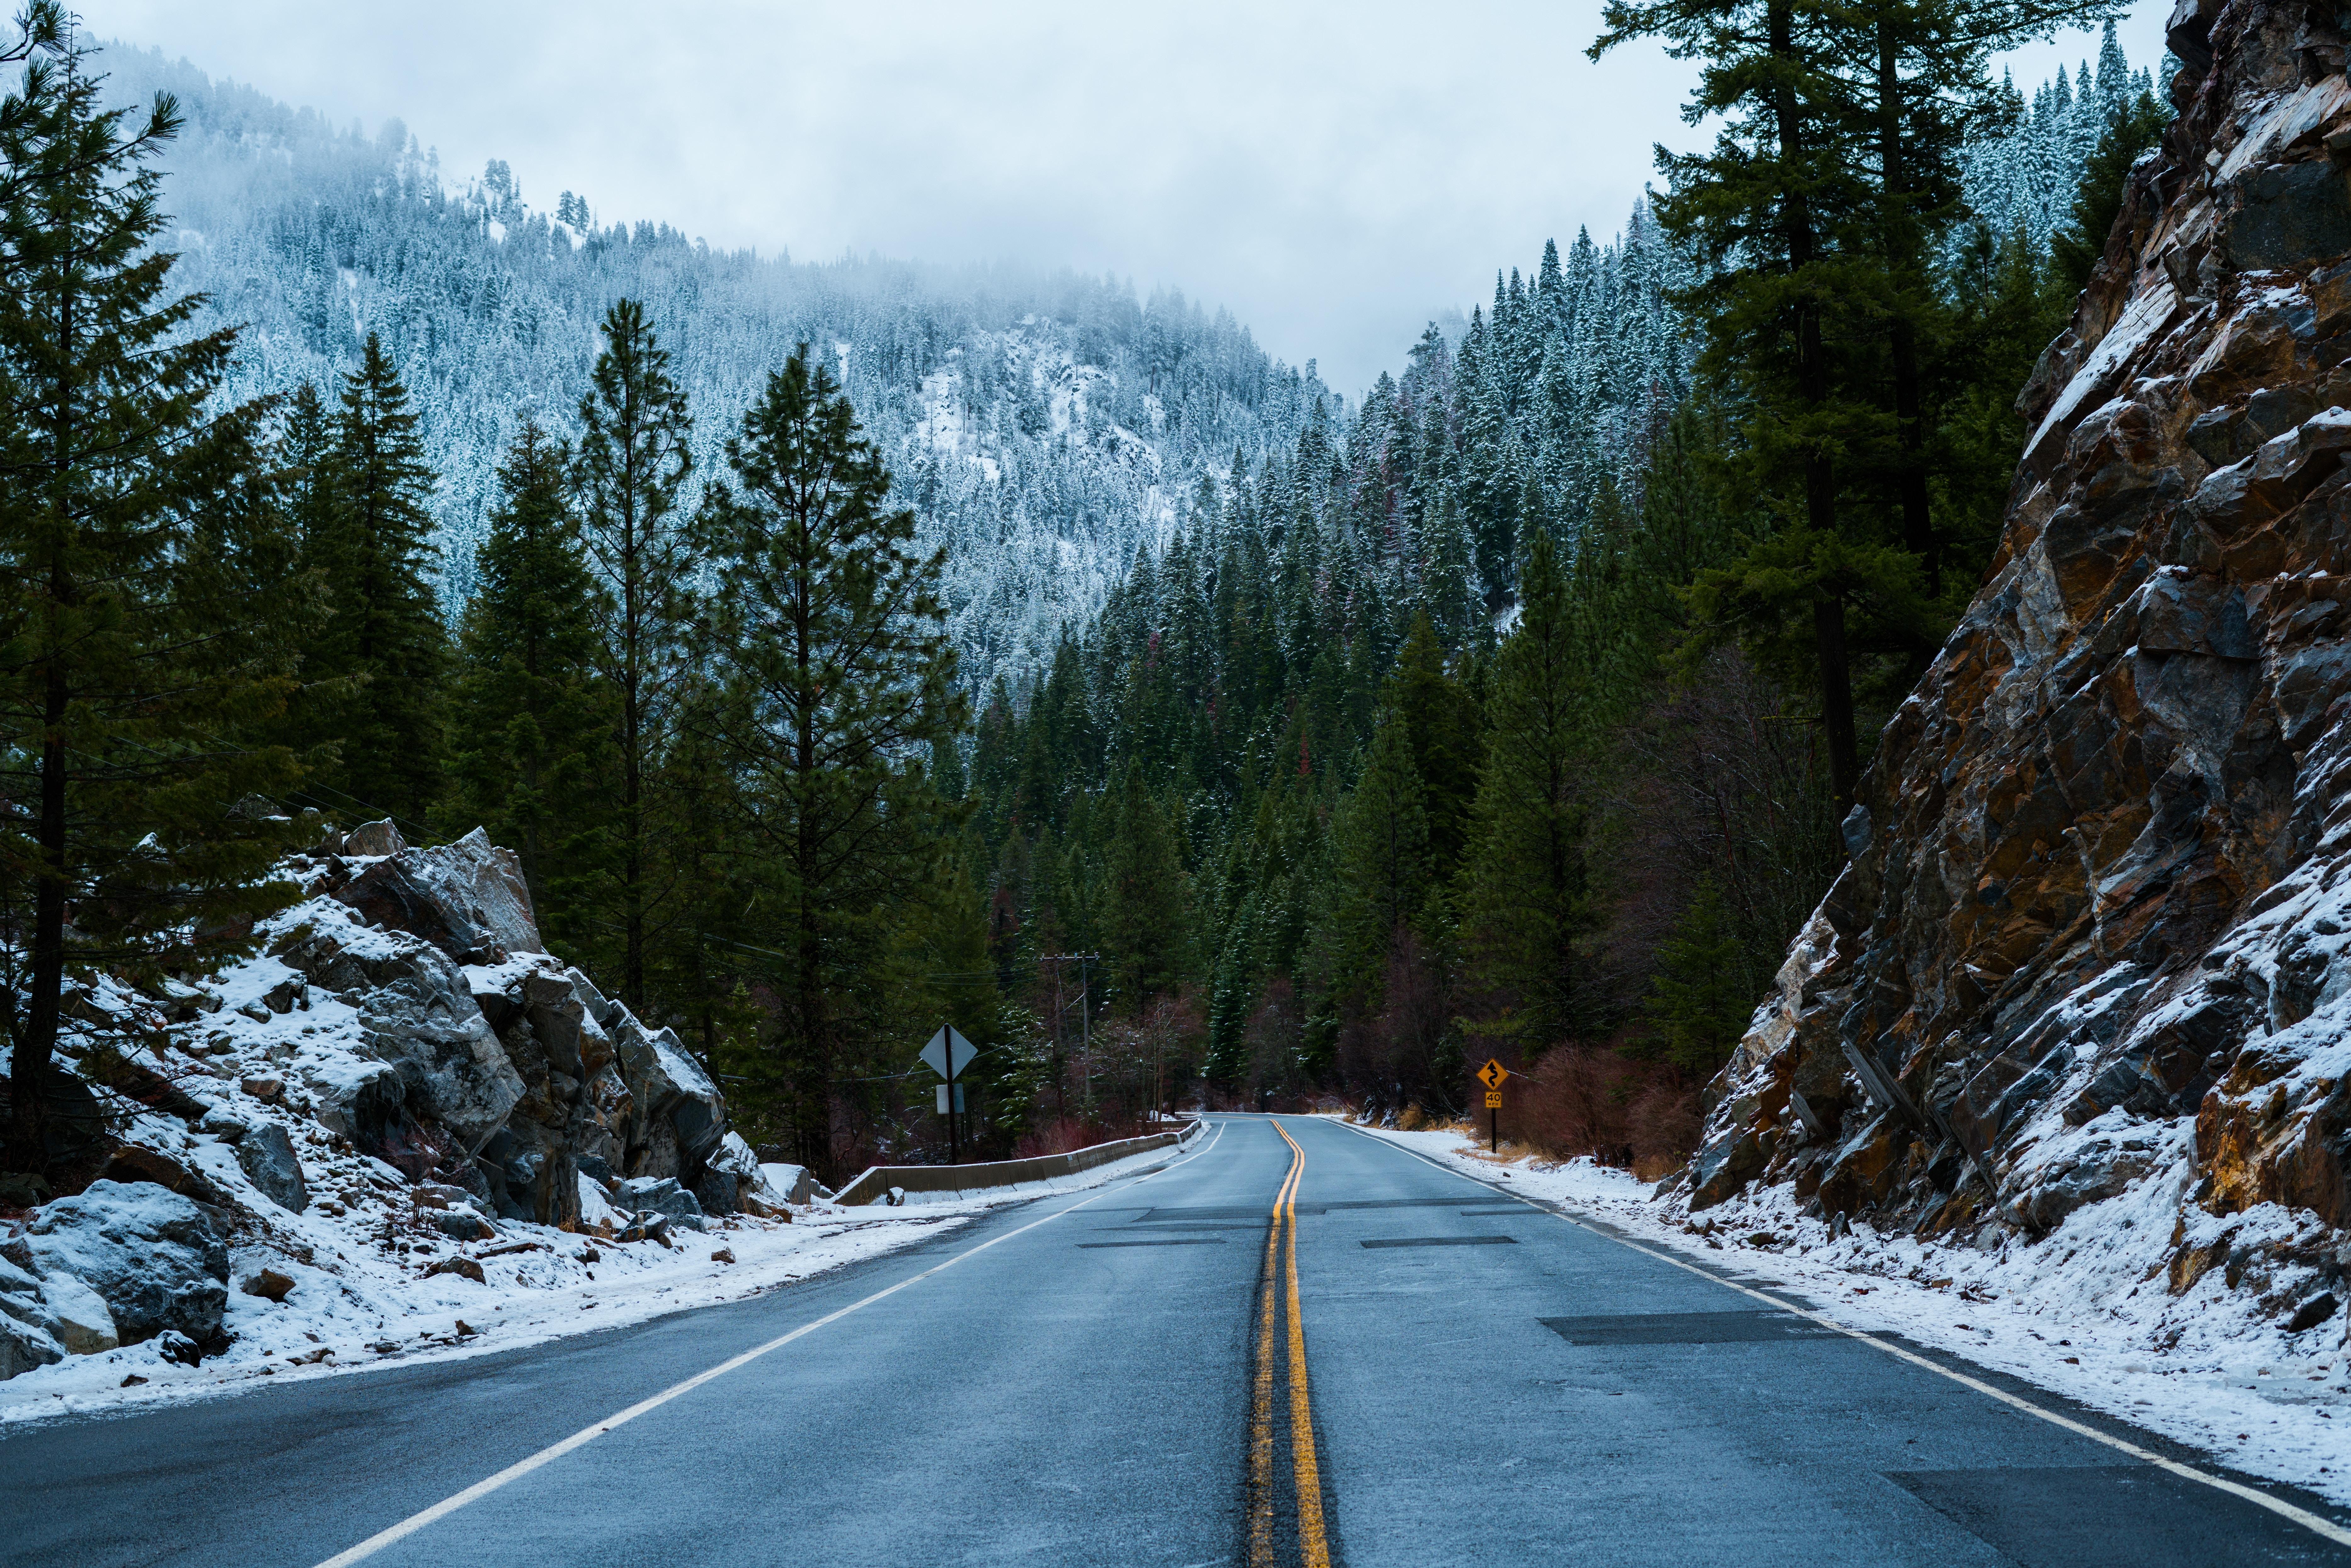 Download 7470x4983 Road, Snow, Forest, Mountain, Rock, Winter